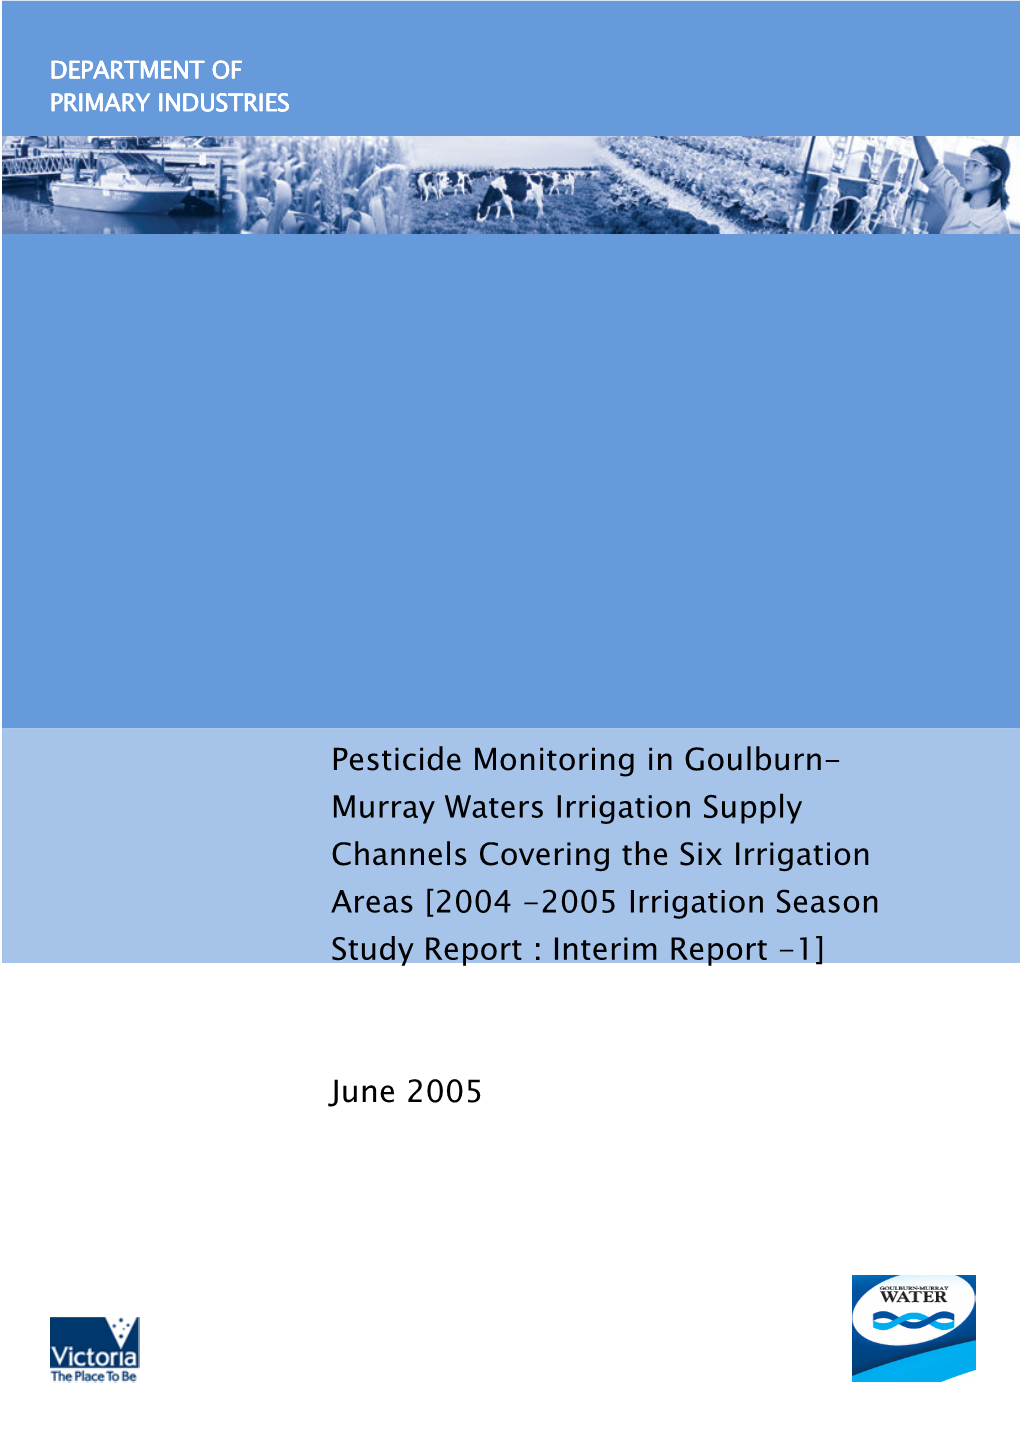 Pesticide Monitoring in Goulburn- Murray Waters Irrigation Supply